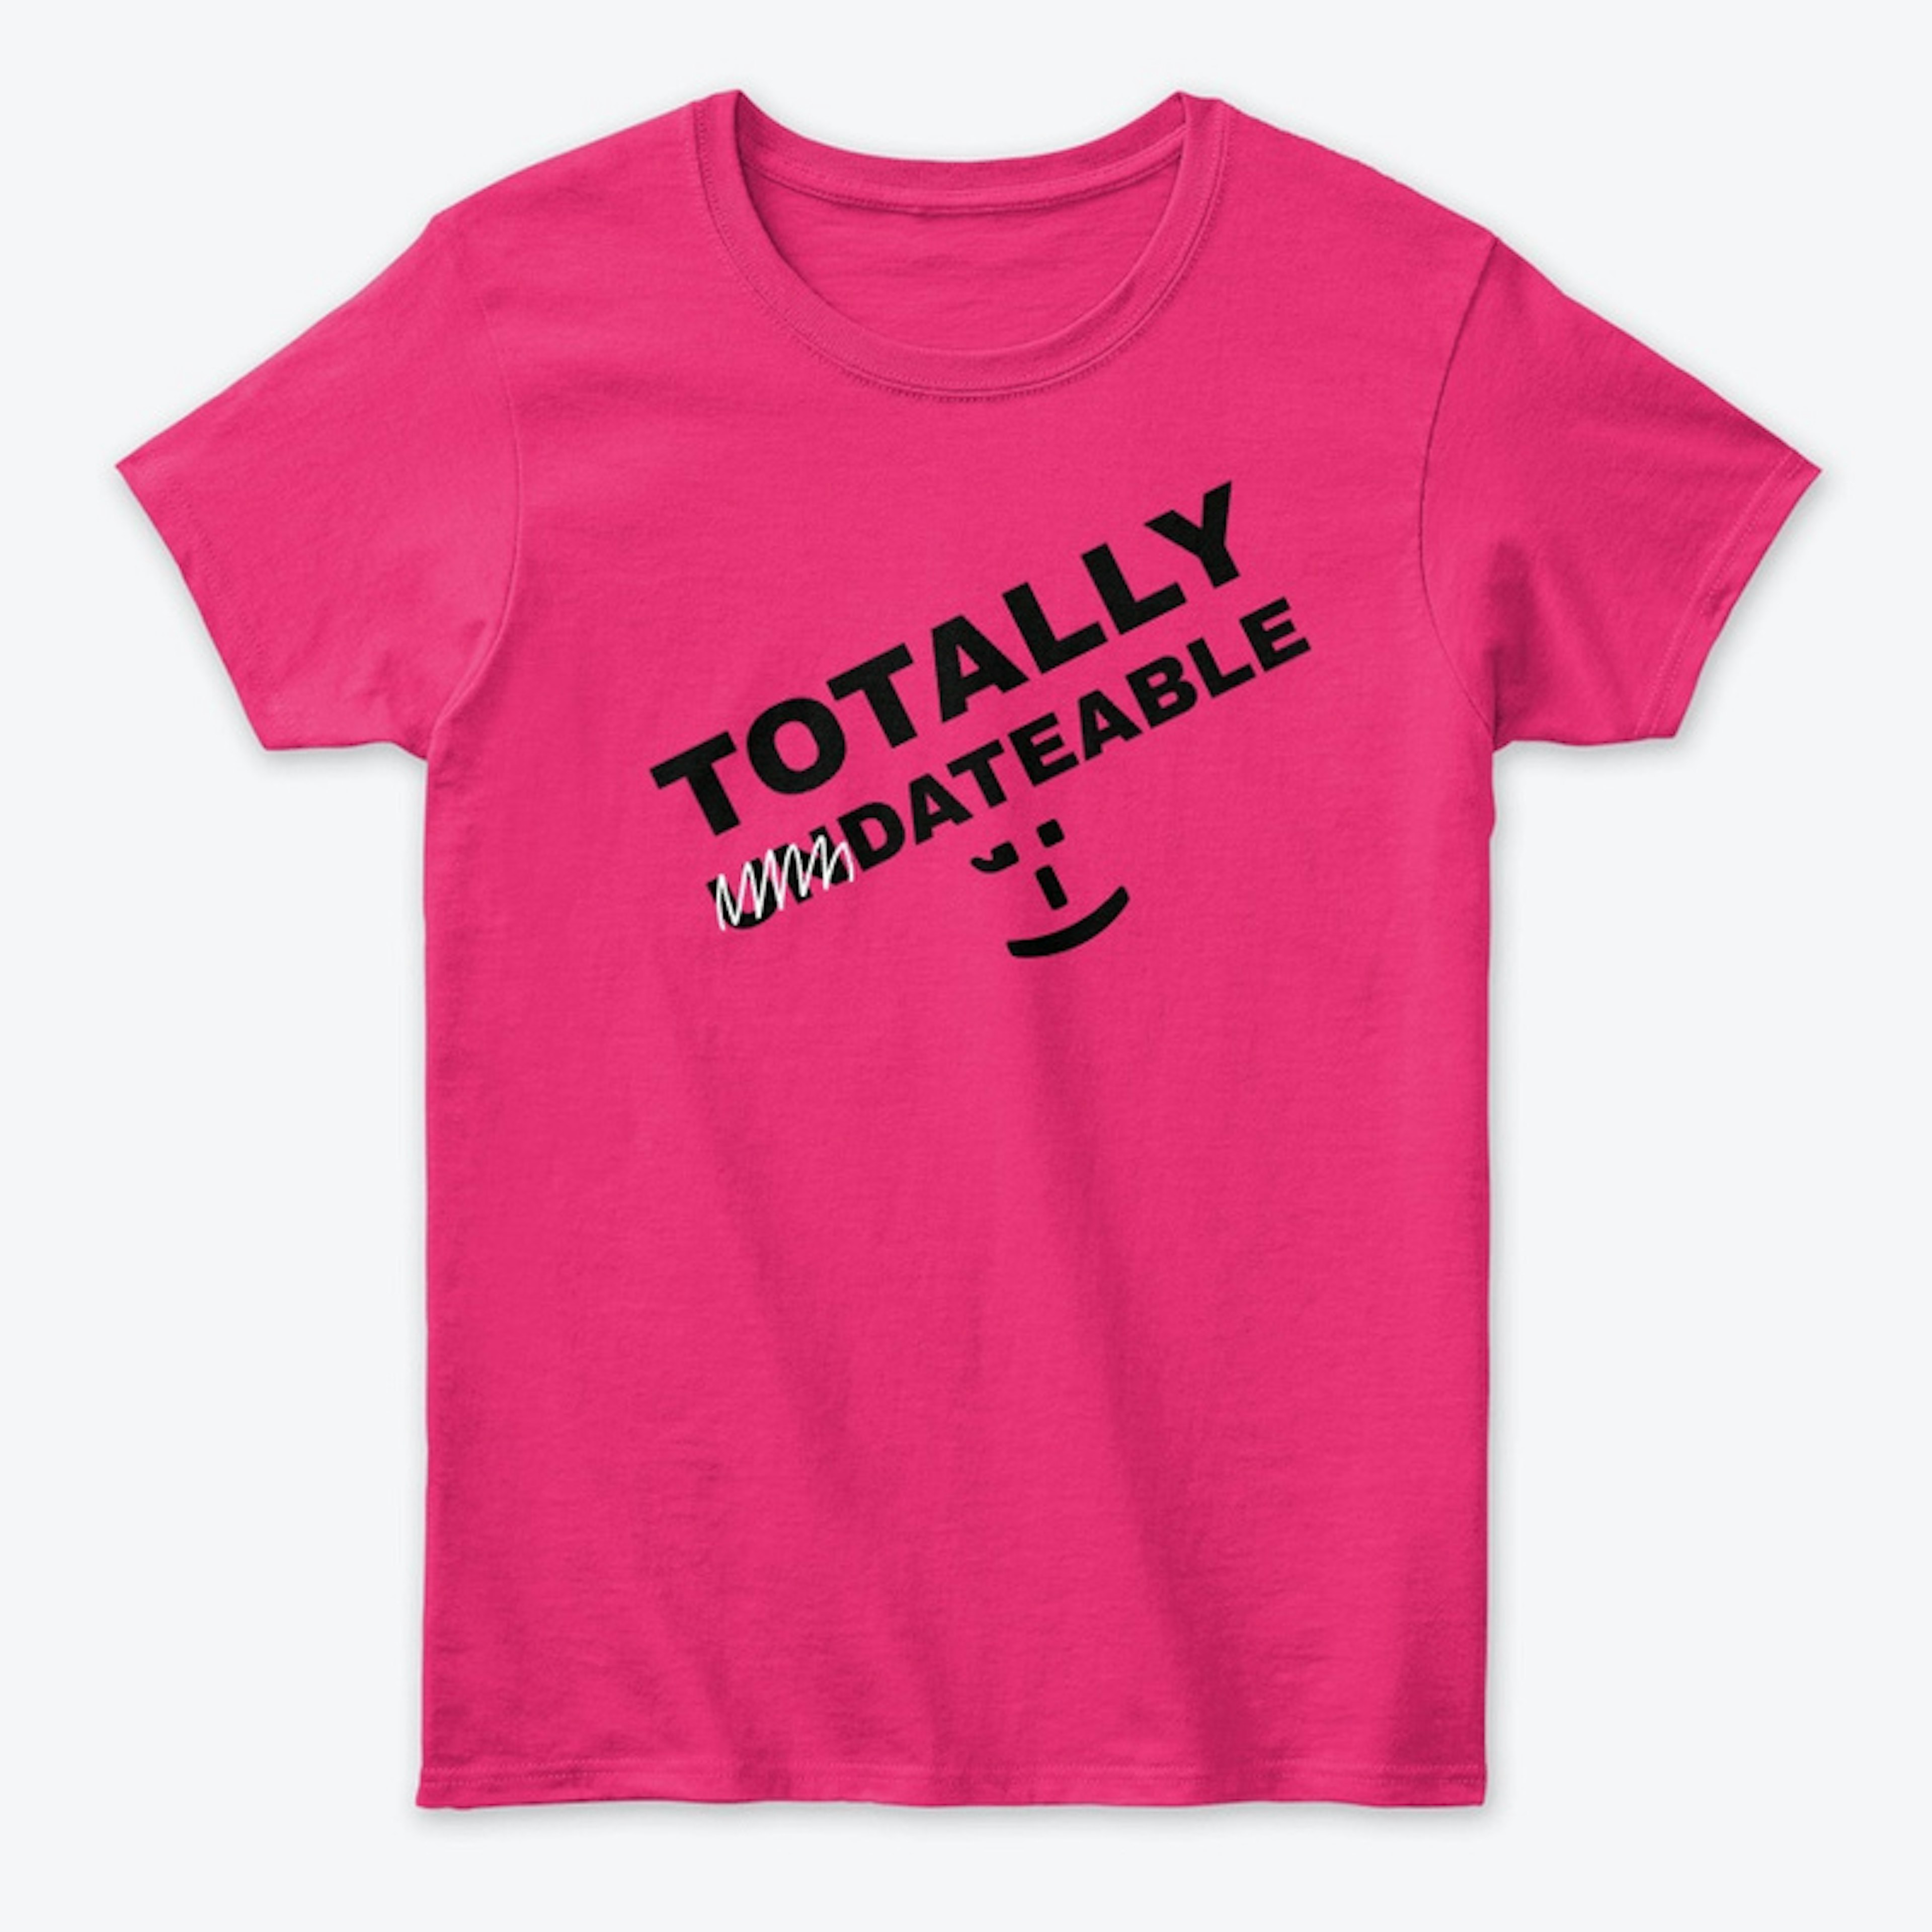 Totally Dateable  T-Shirt.